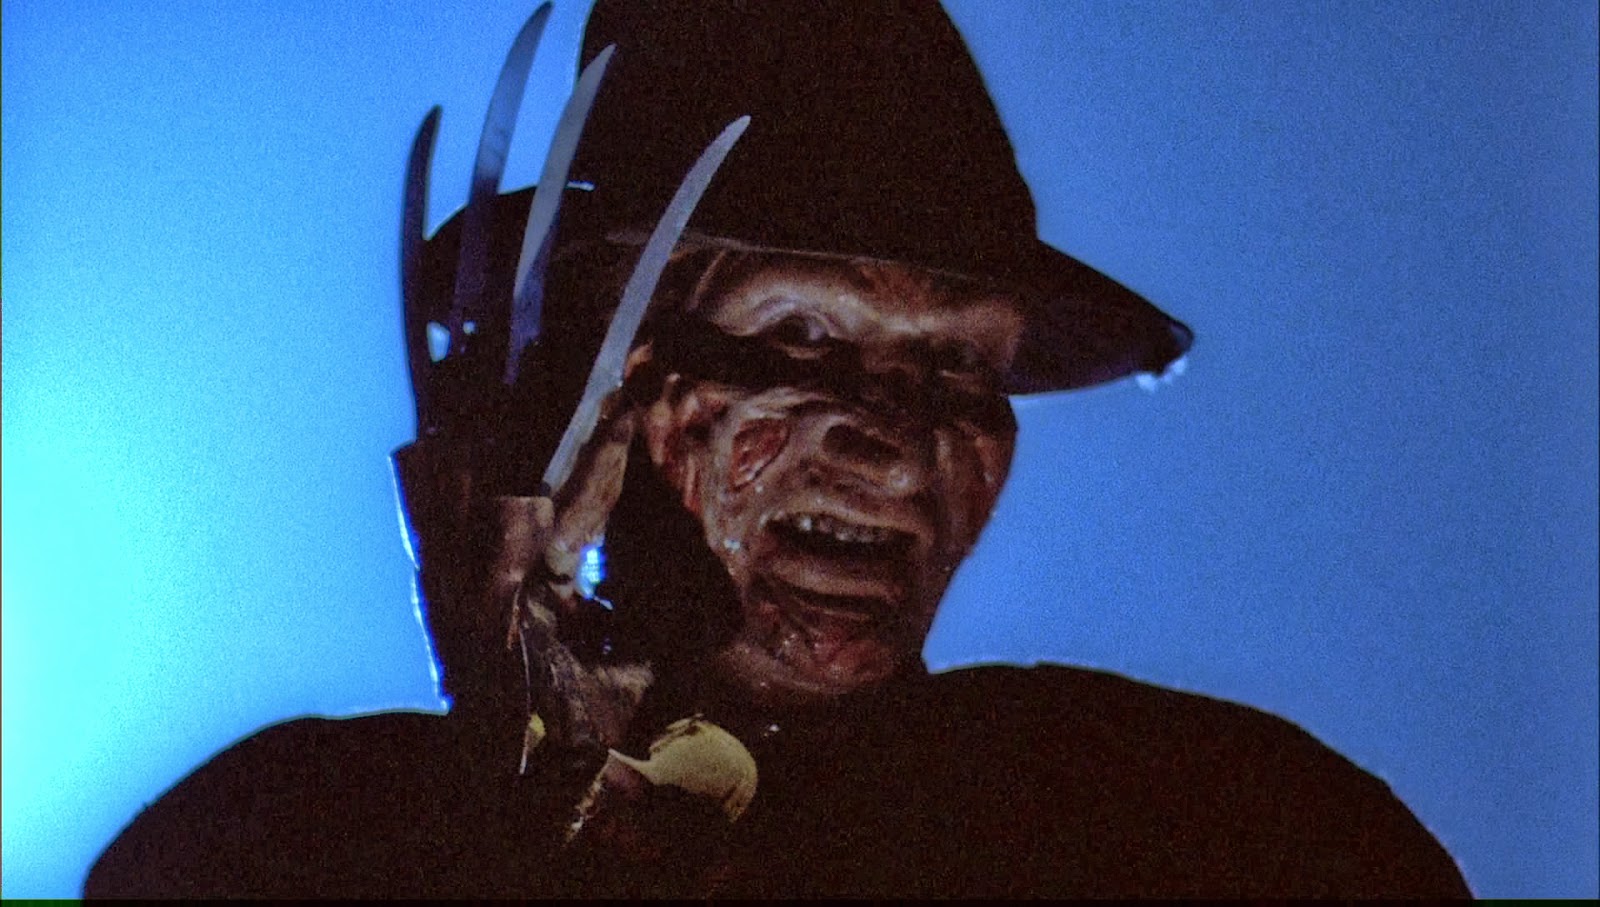 A Nightmare On Elm Street 7: The Real Story [1994]